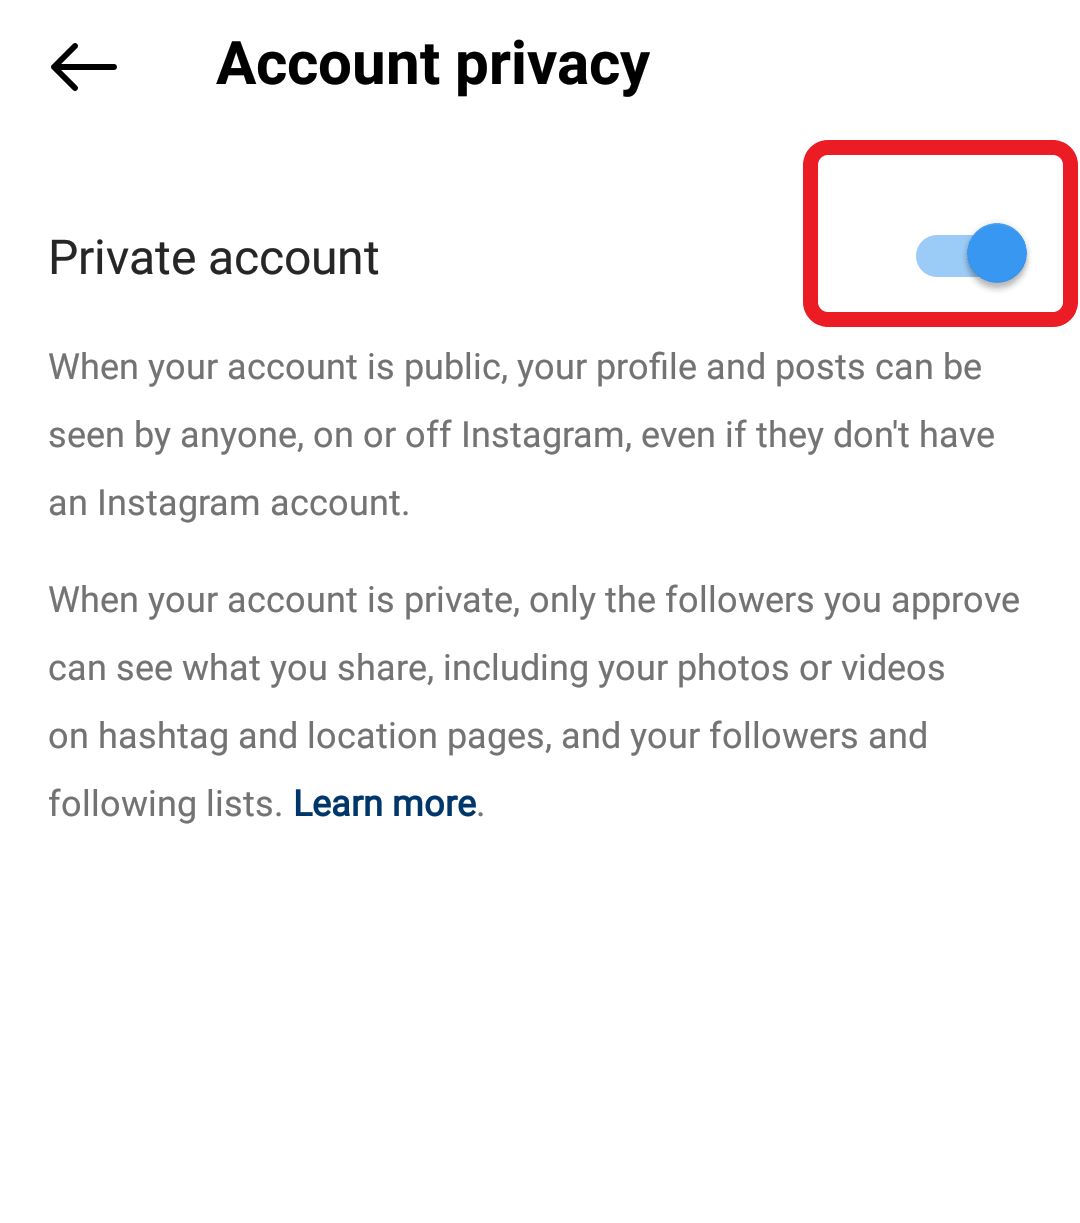 Instagram Account privacy